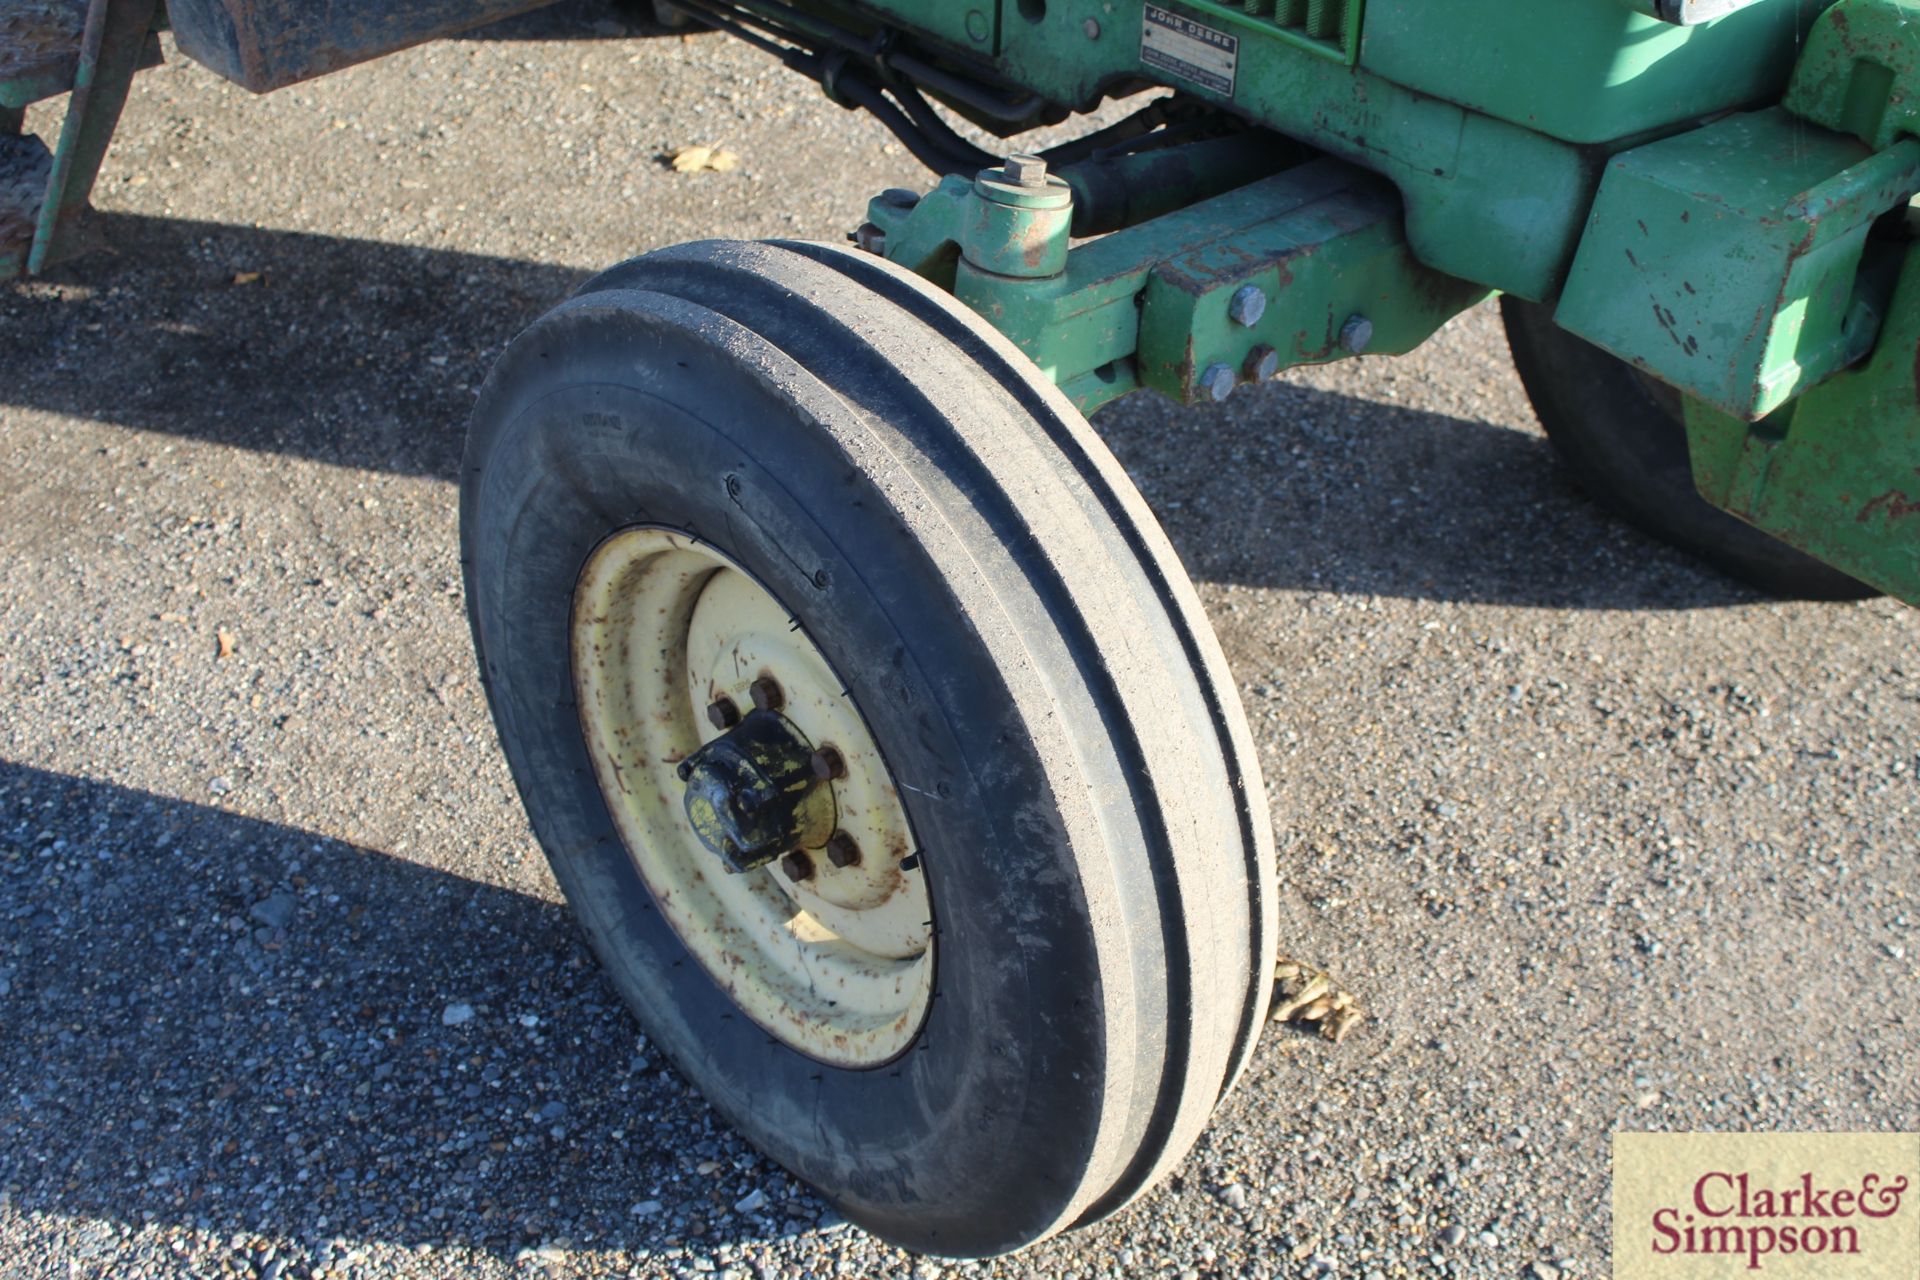 John Deere 1640 2WD tractor. Registration ETH 628V. 1980. 5,328 hours. 13.6R36 rear wheels and - Image 31 of 42